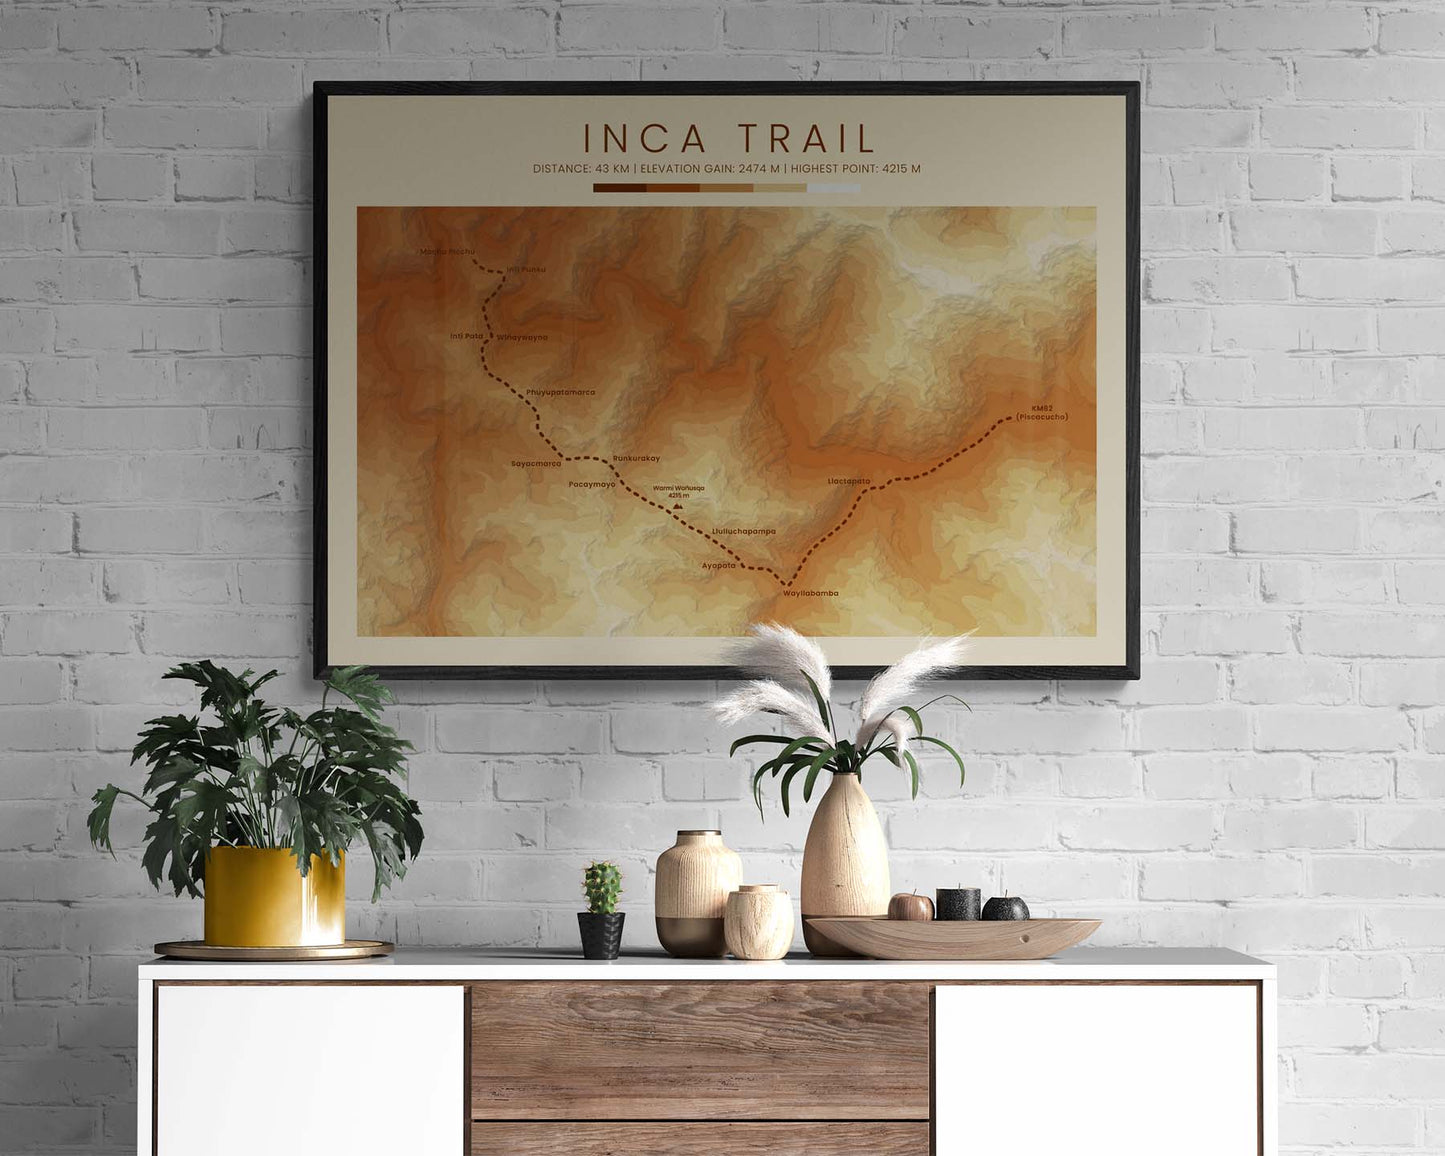 Inca Trail to Machu Picchu (Peru) Hike Poster with Topographic Map in Modern Interior Wall Art